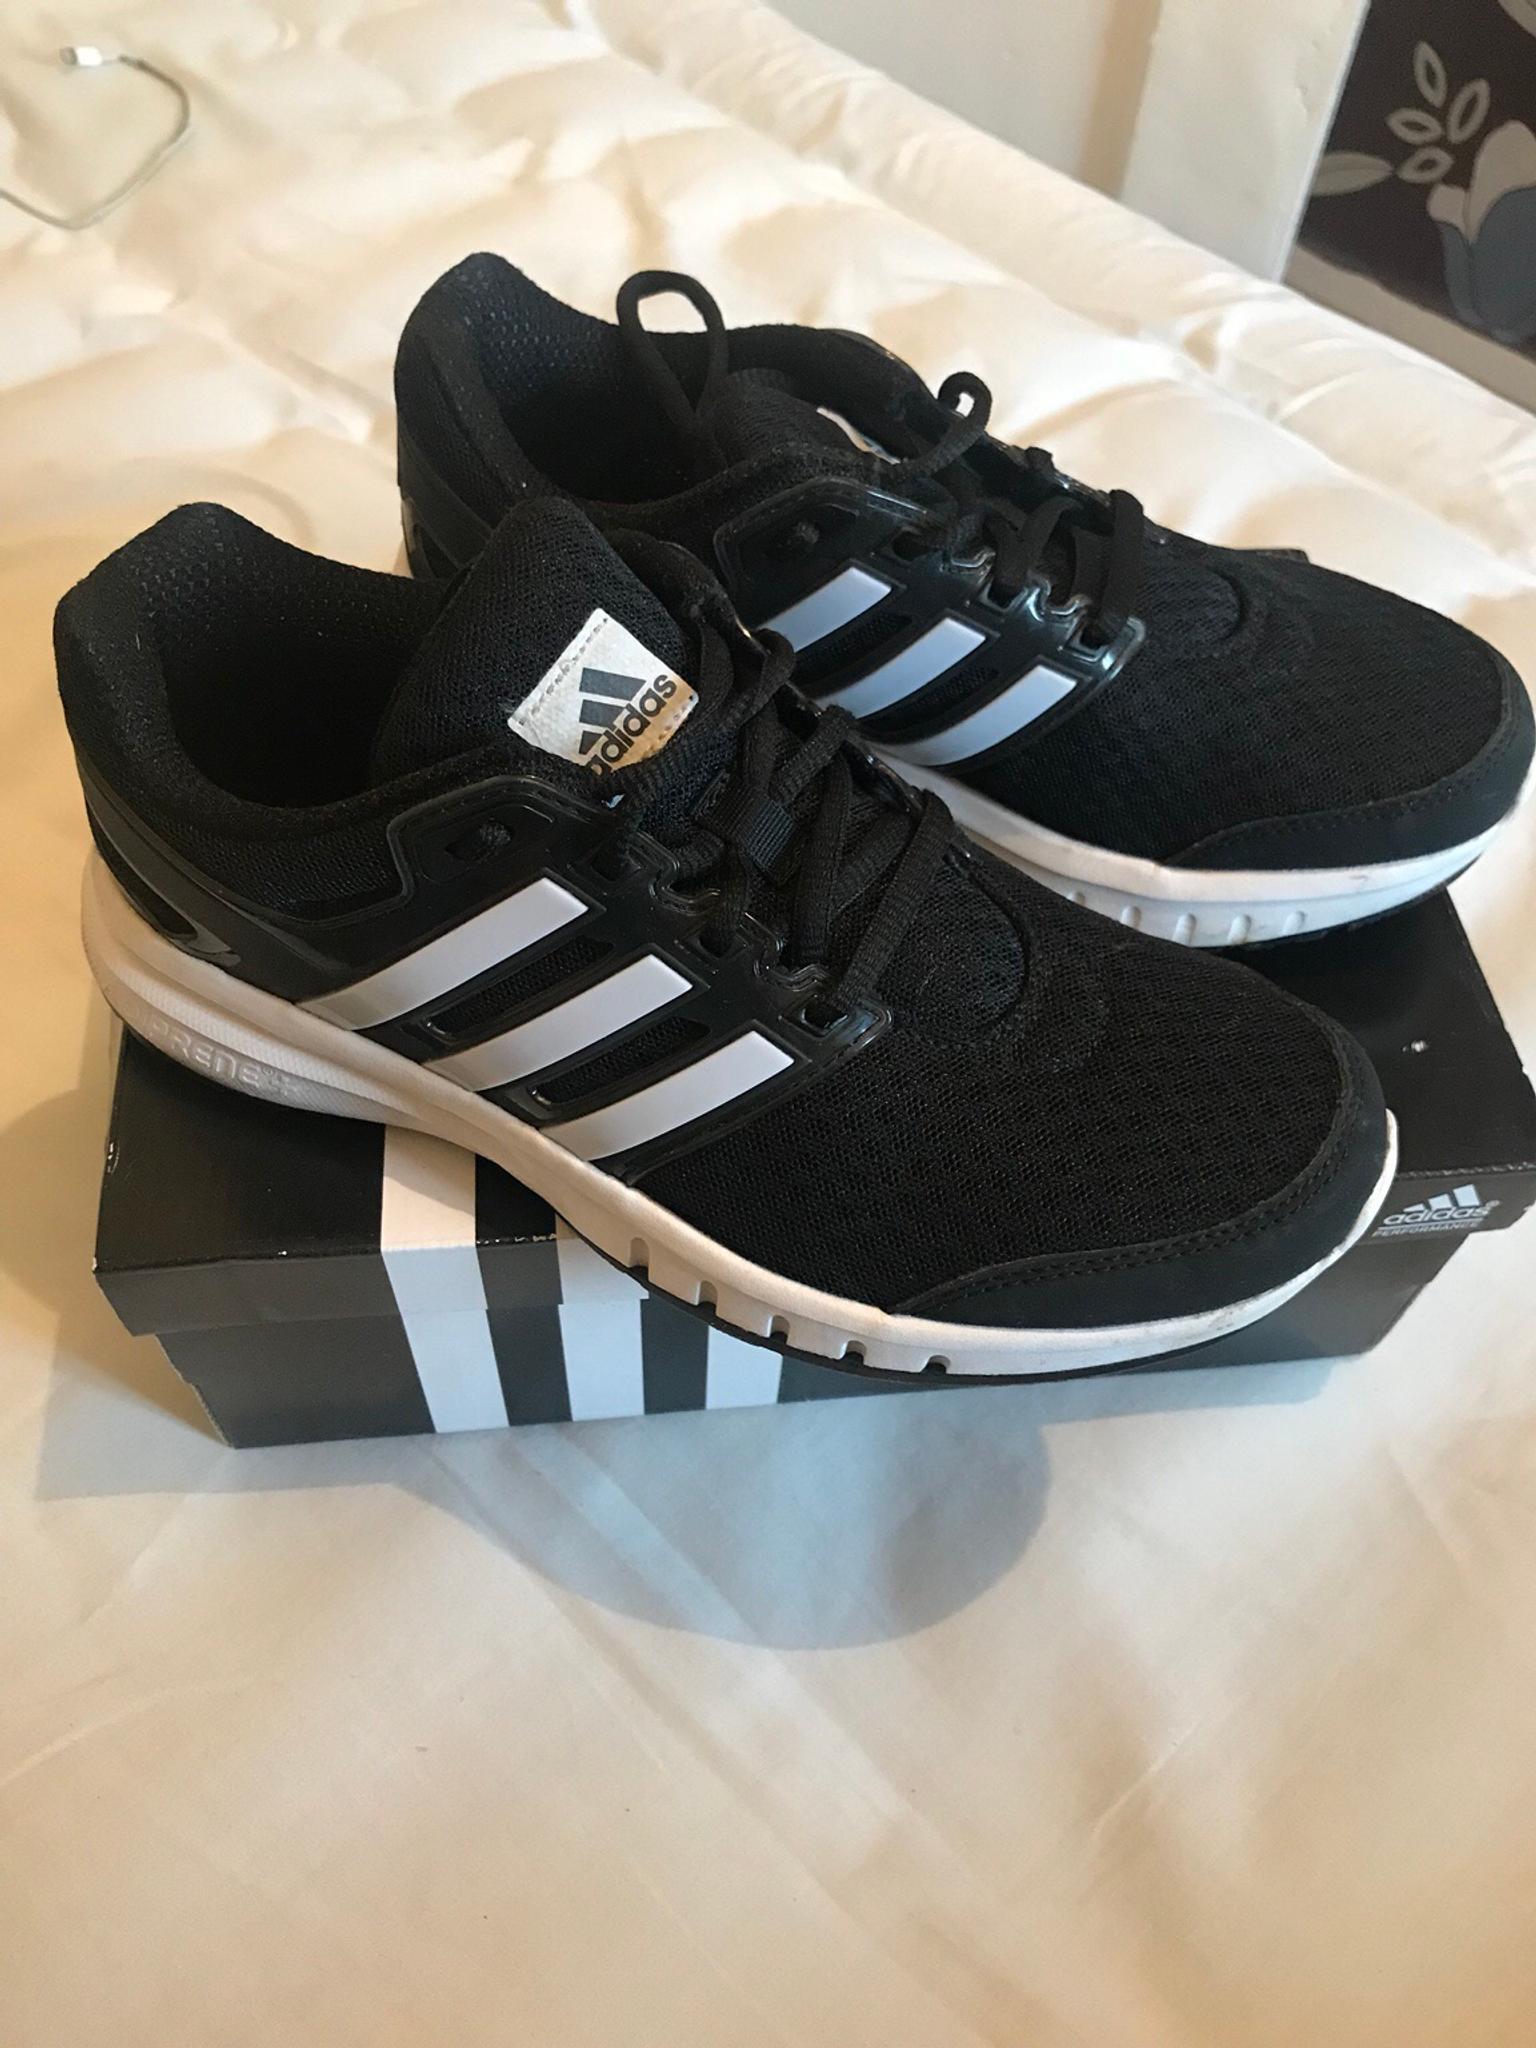 Adidas Galaxy Elite ladies size 4 in WF6 Wakefield for £15.00 for sale |  Shpock